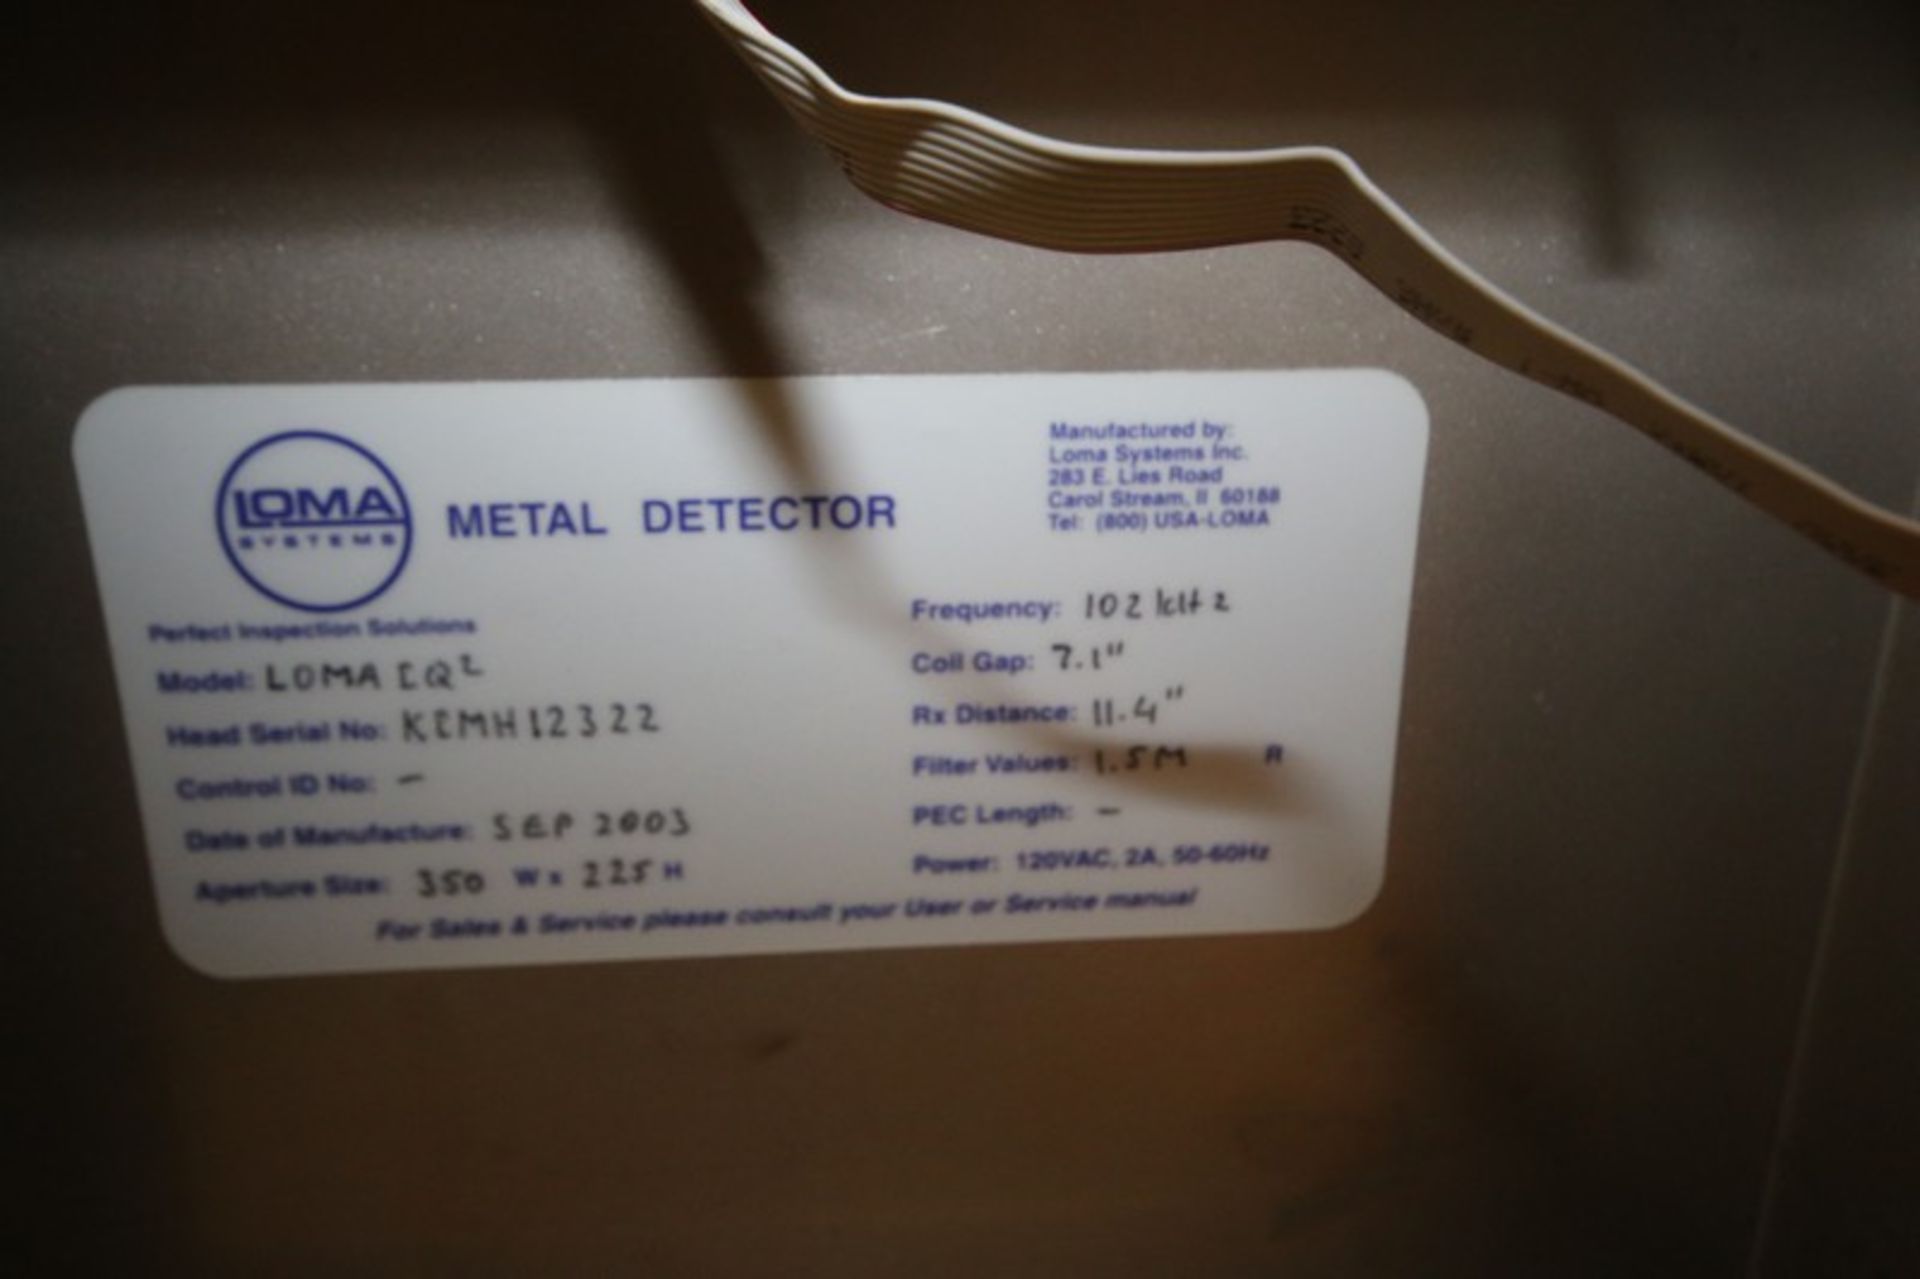 Loma S/S Metal Detector Head, Model LOMA IQ2, SN KEMH12322, with 13" W x 8" H Product Opening, - Image 8 of 8